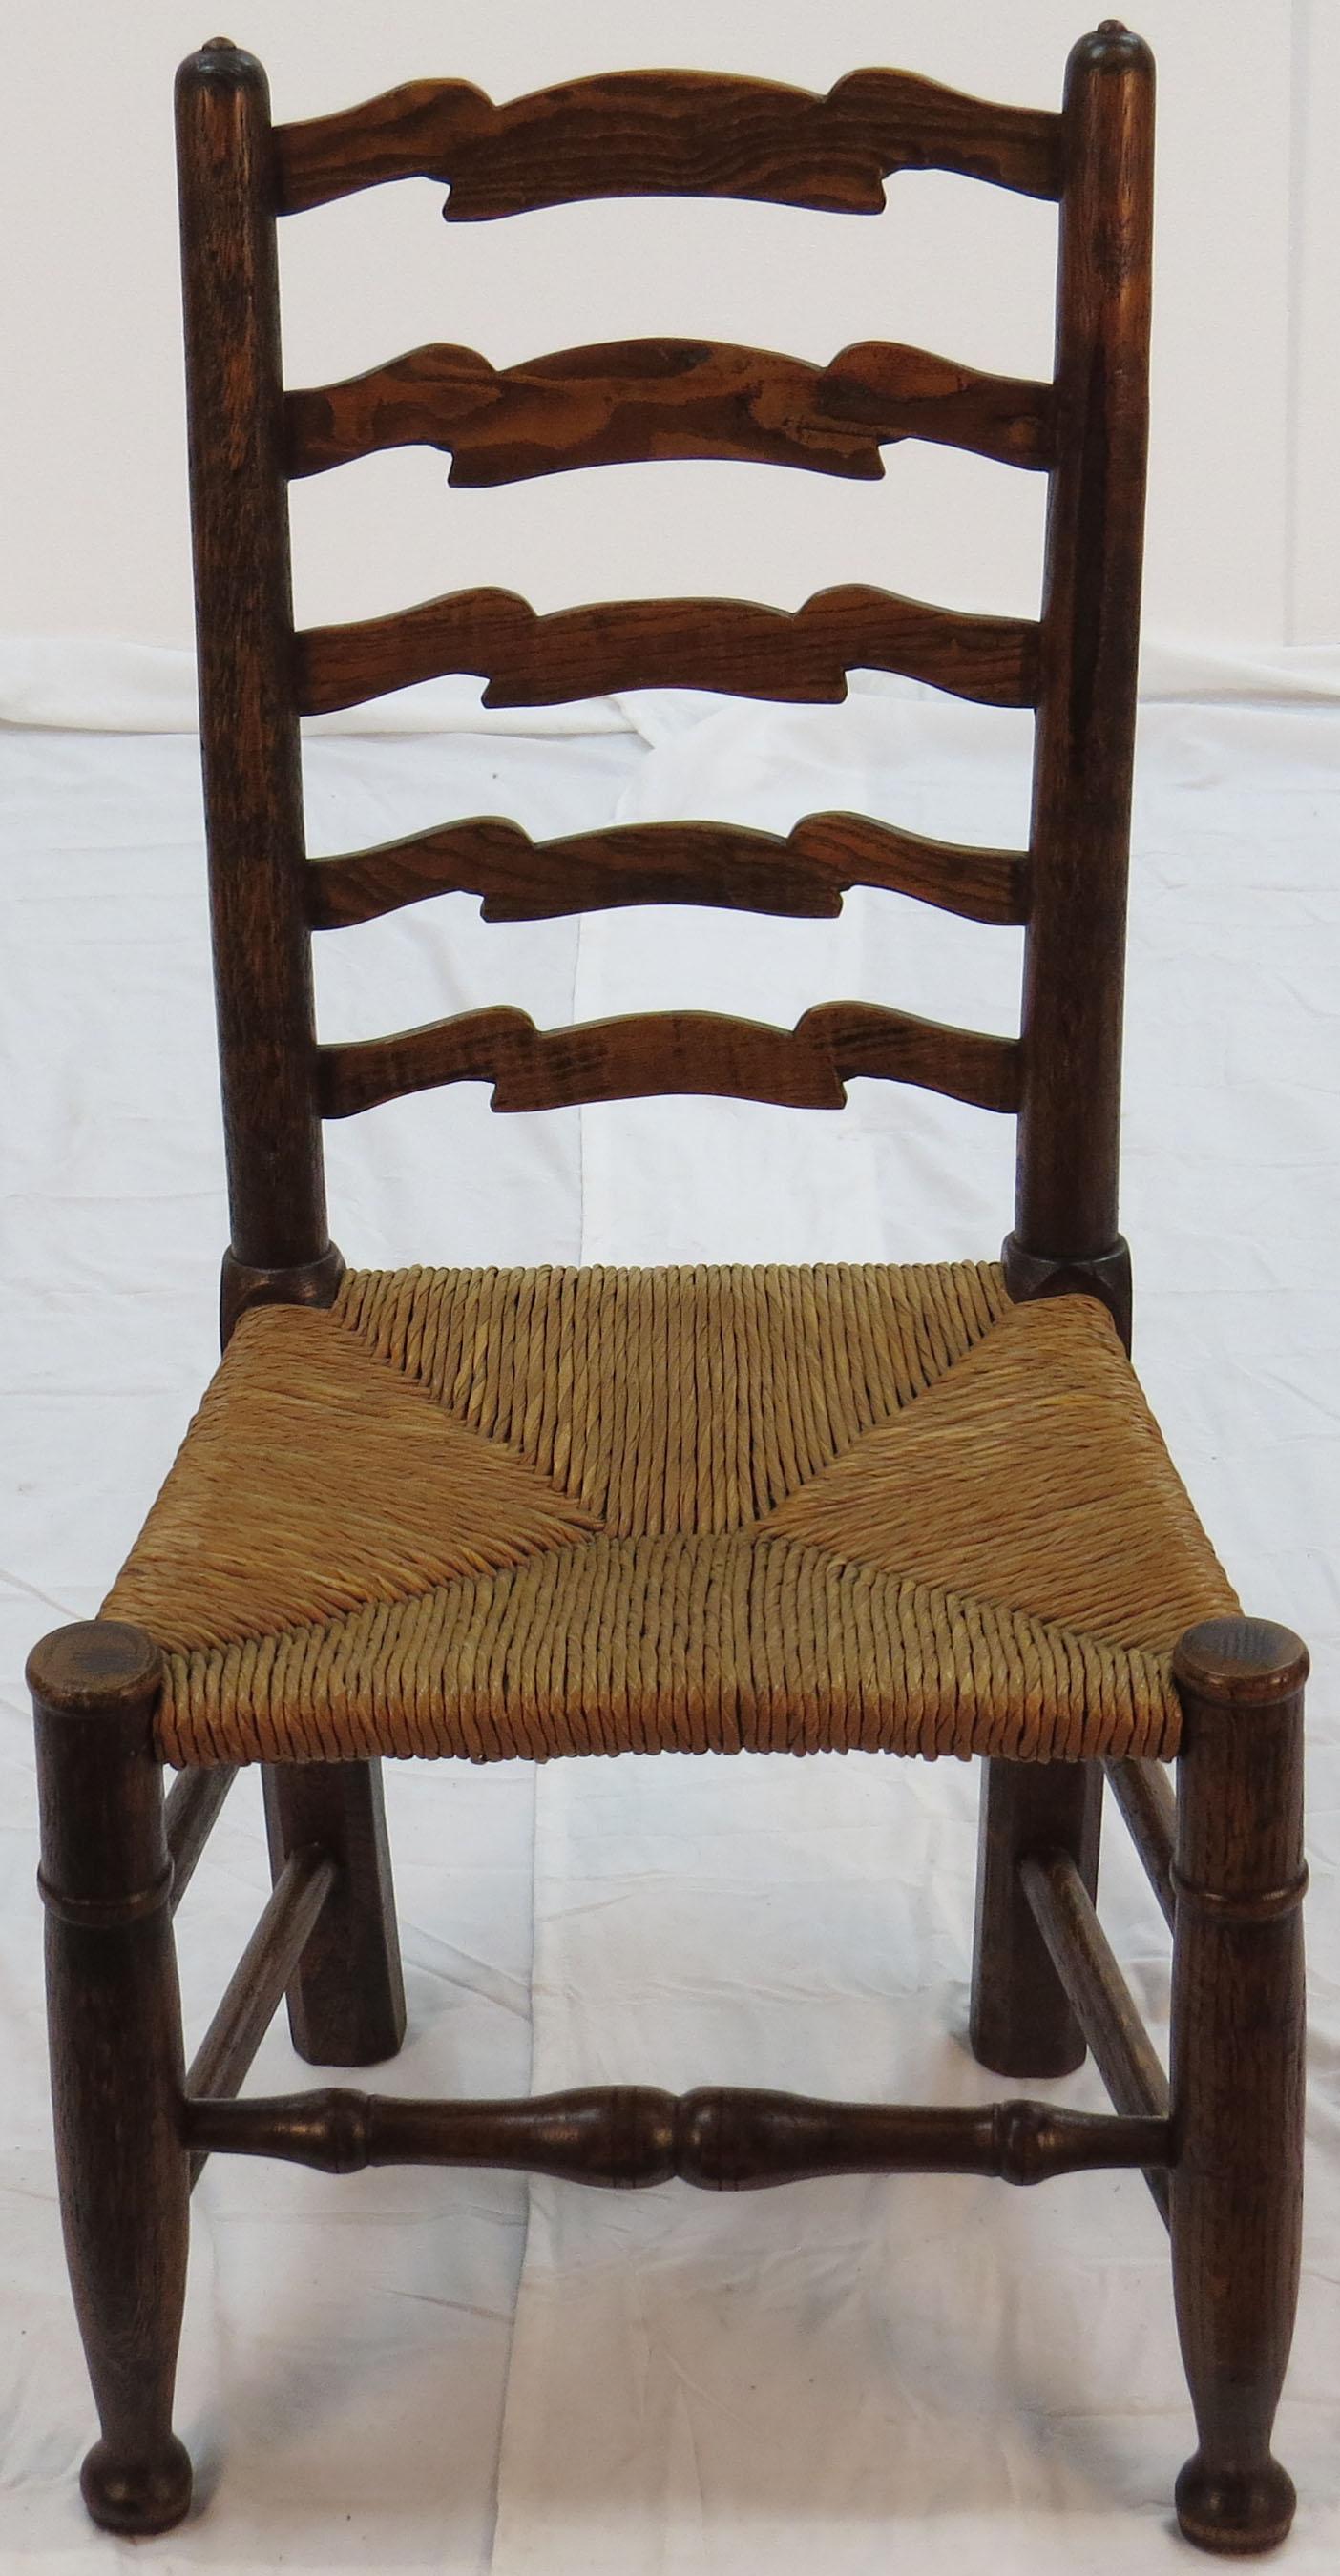 This stunning set of antique ladder back dining chairs were made of solid oak in England, circa 1940. That date technically makes them vintage rather than antique. The set consists of six chairs, none of which have arm rests.

These solid oak